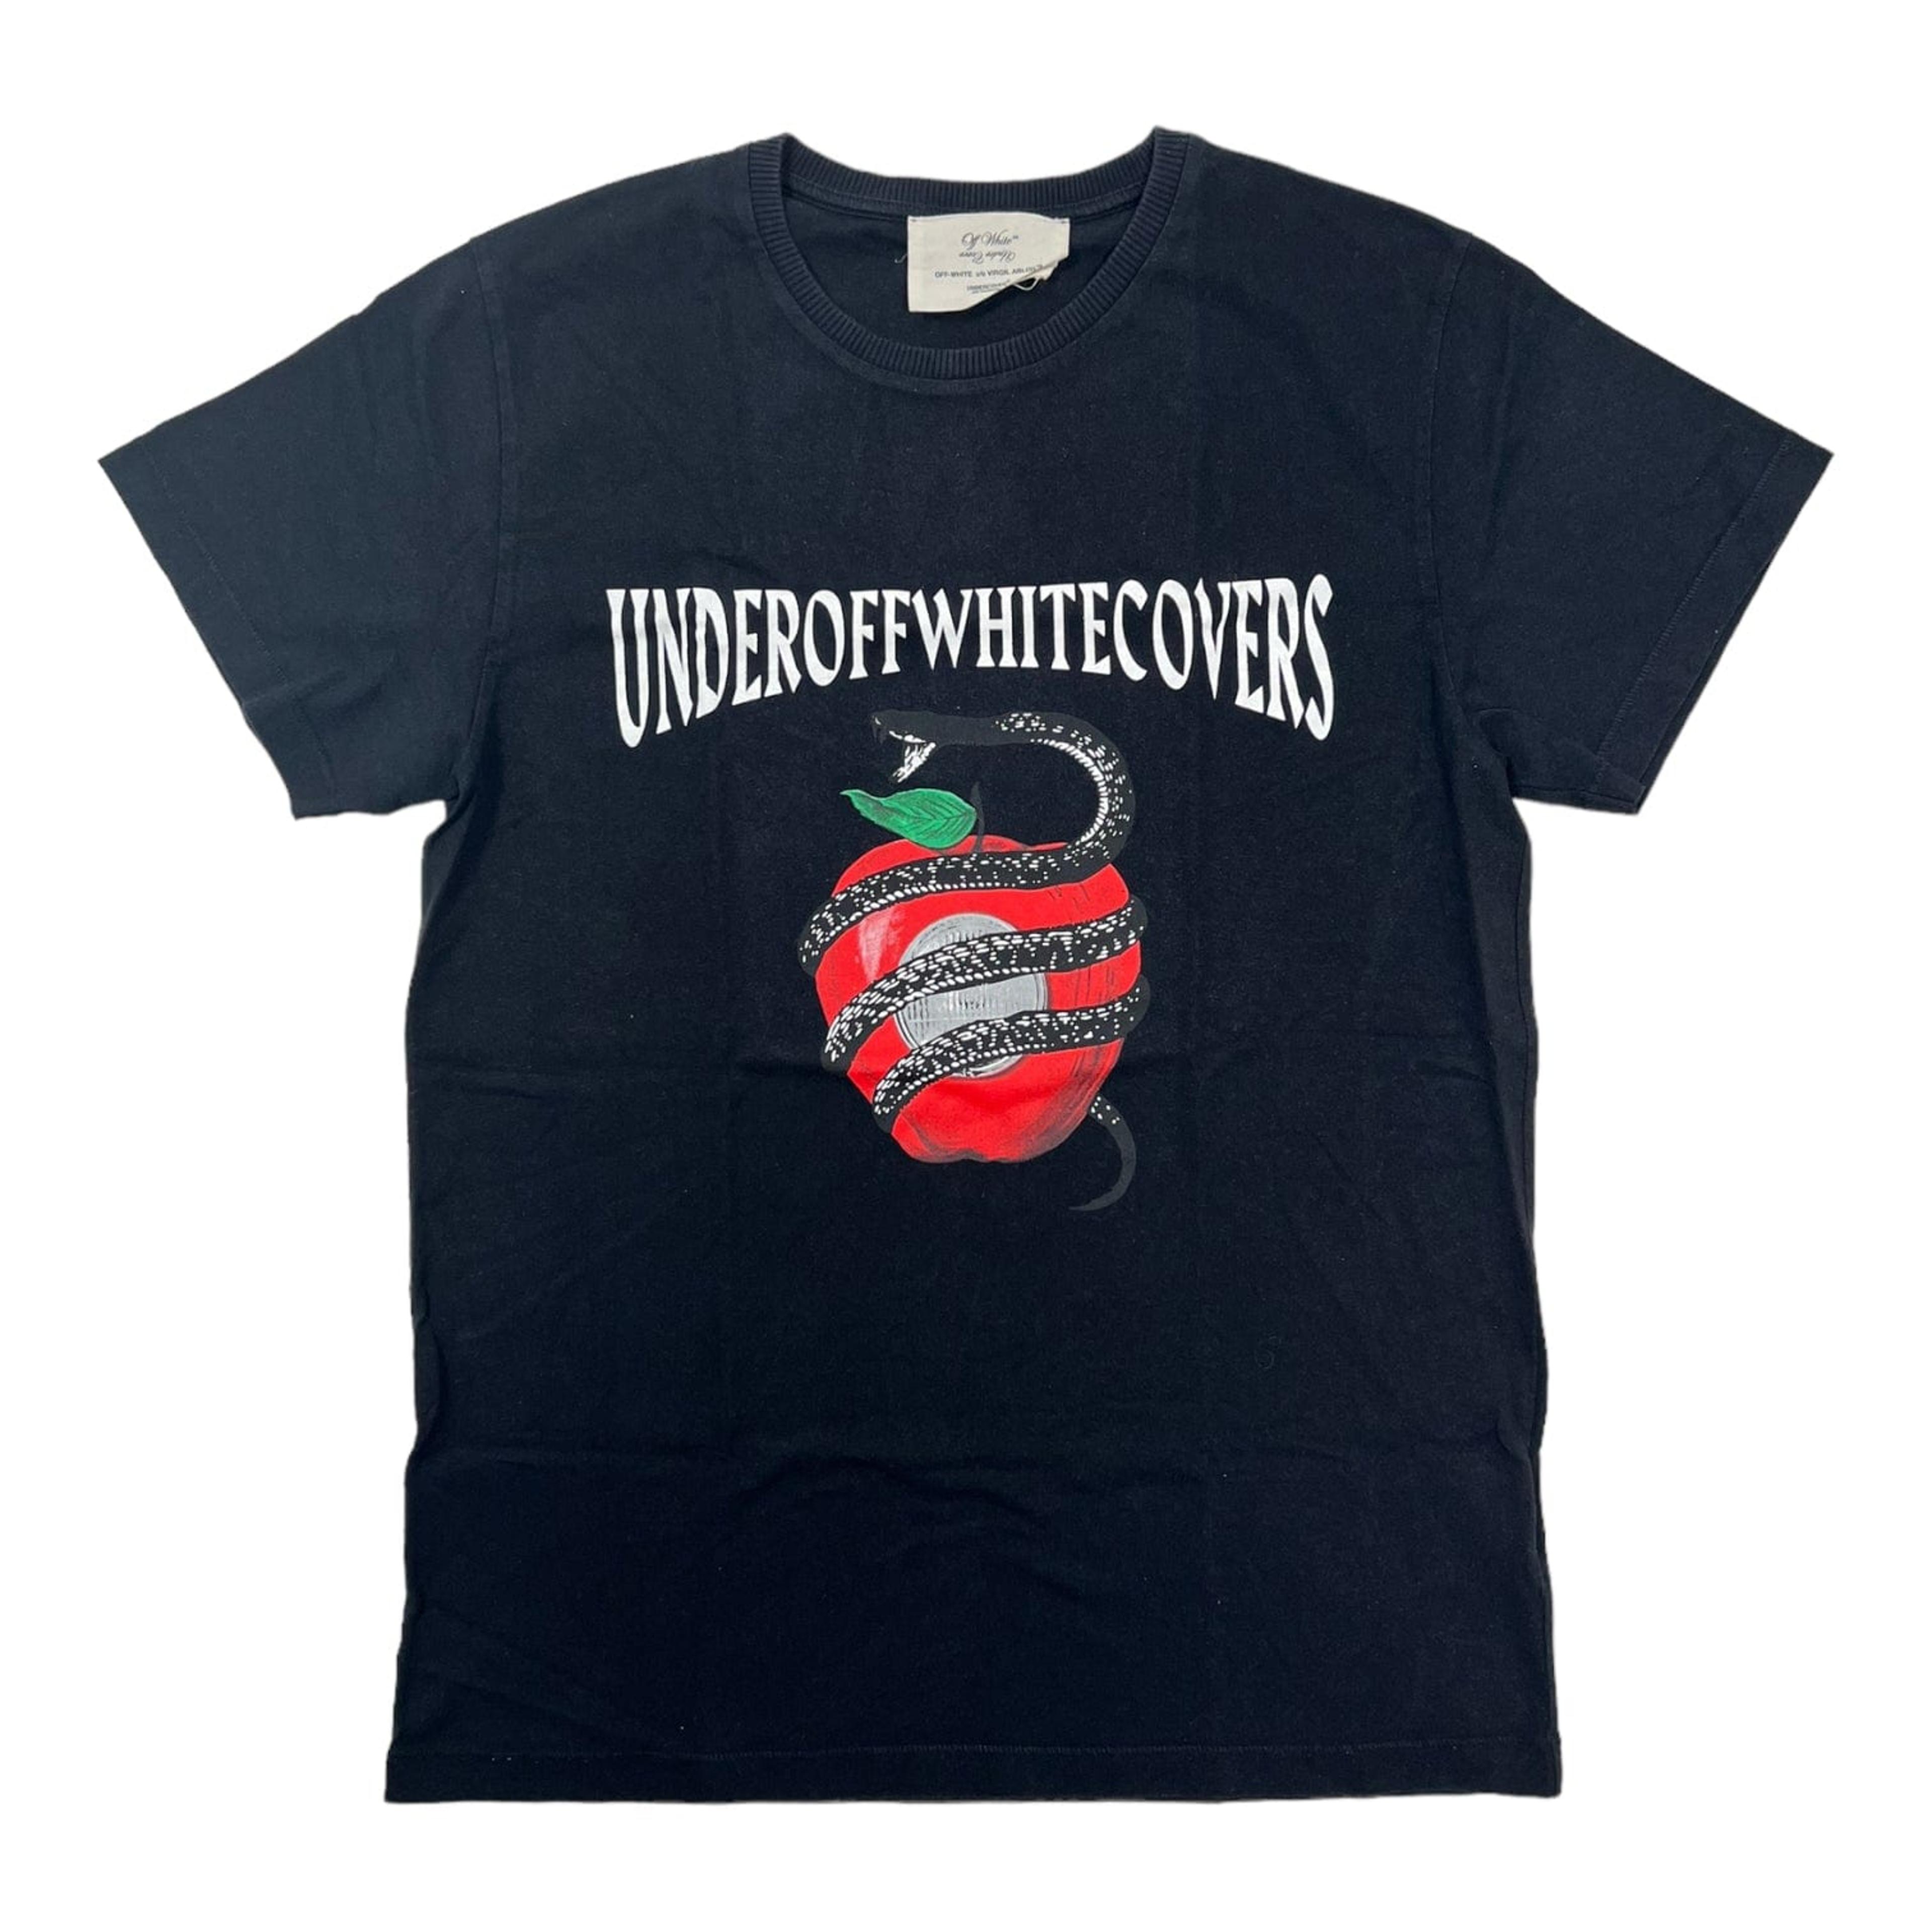 Off-White Undercover Short Sleeve Tee Shirt Black Pre-Owned